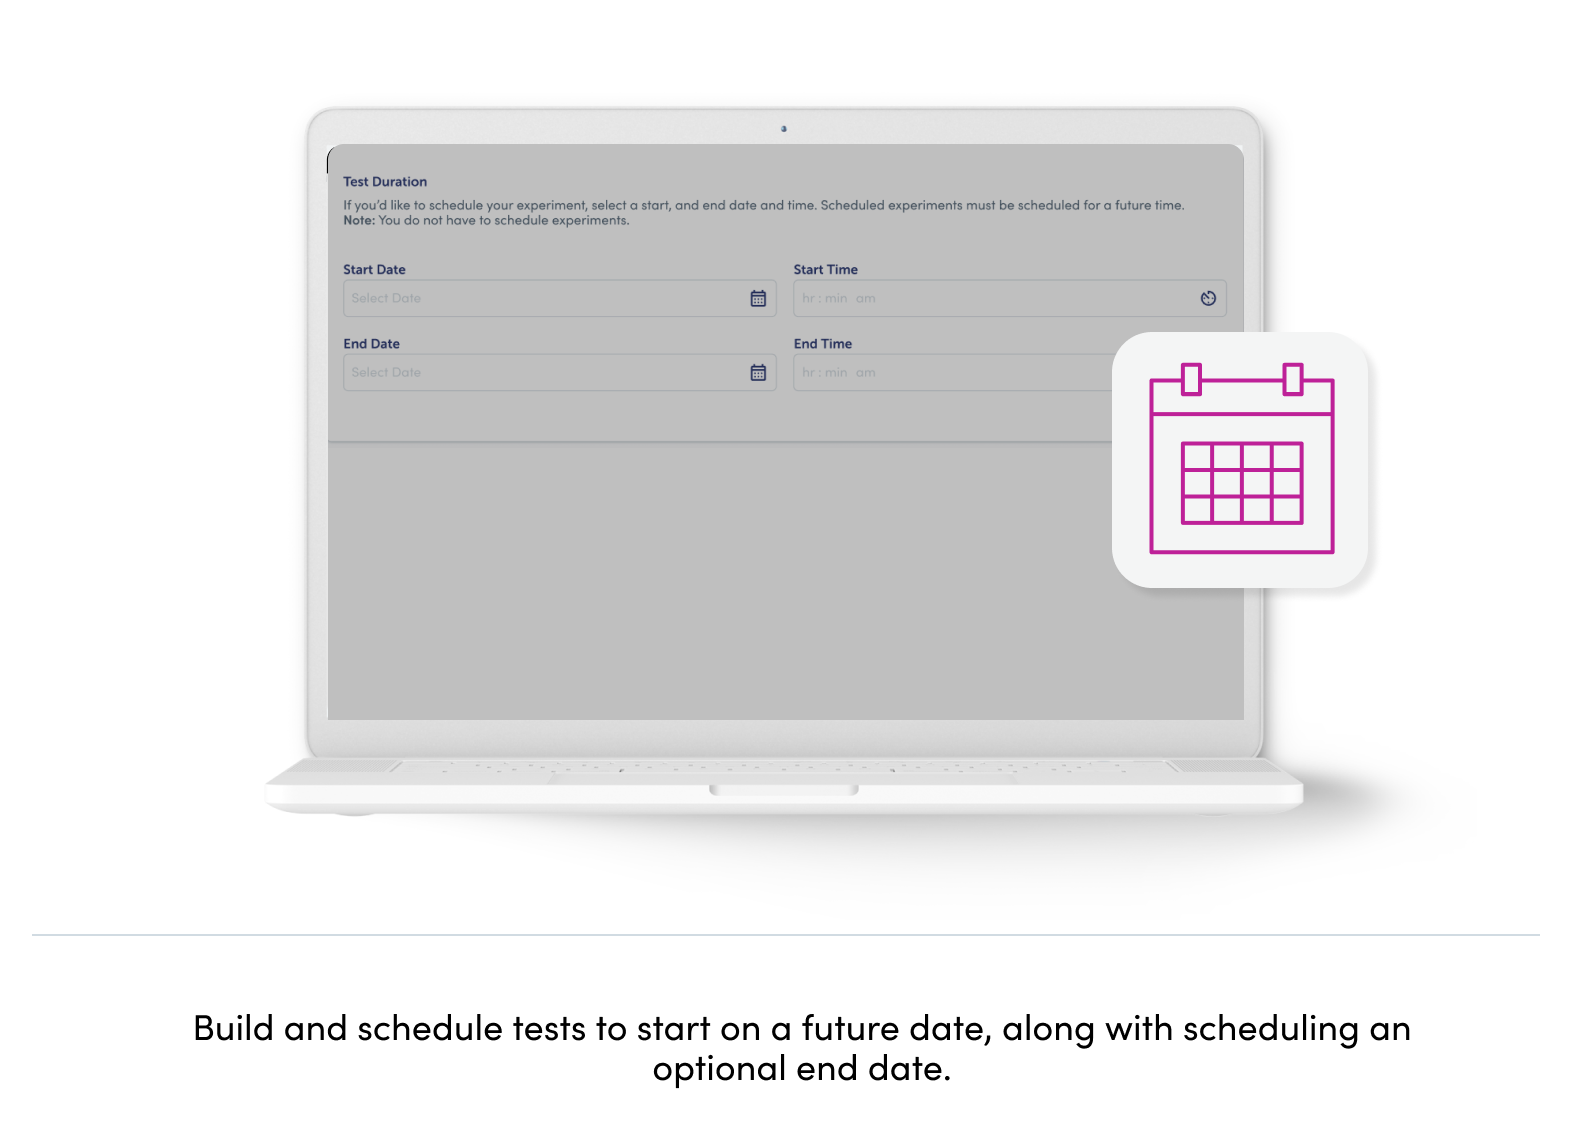 Build and schedule tests to start on a future date, along with scheduling an optional end date.